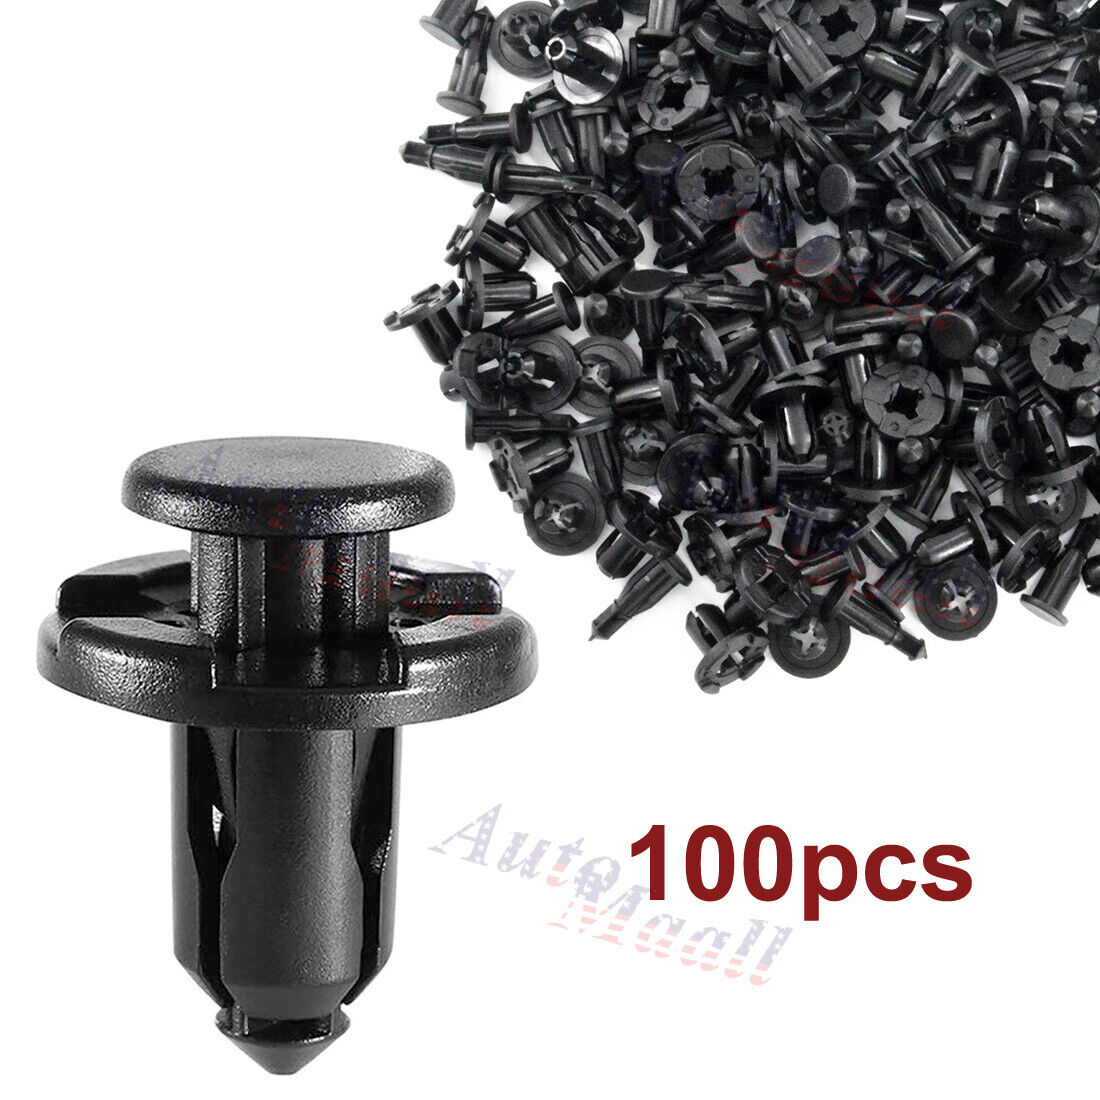 100pcs Bumper Engine Cover Fender Clips Push Type Retainers Fasteners For Subaru